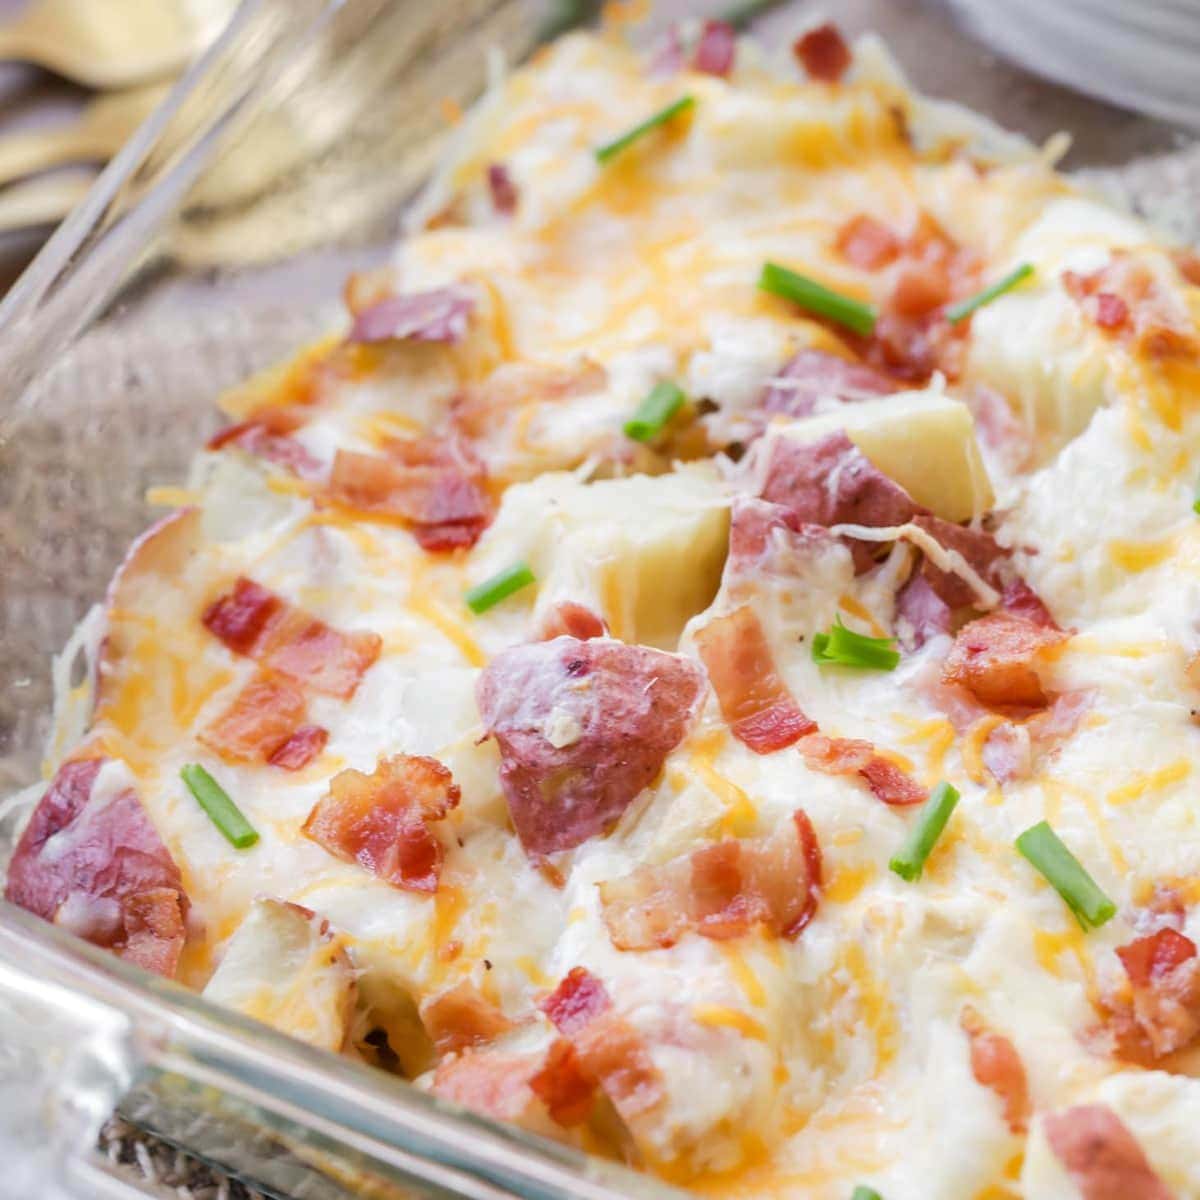 Christmas side dishes - twice baked potato casserole topped with bacon and green onions.